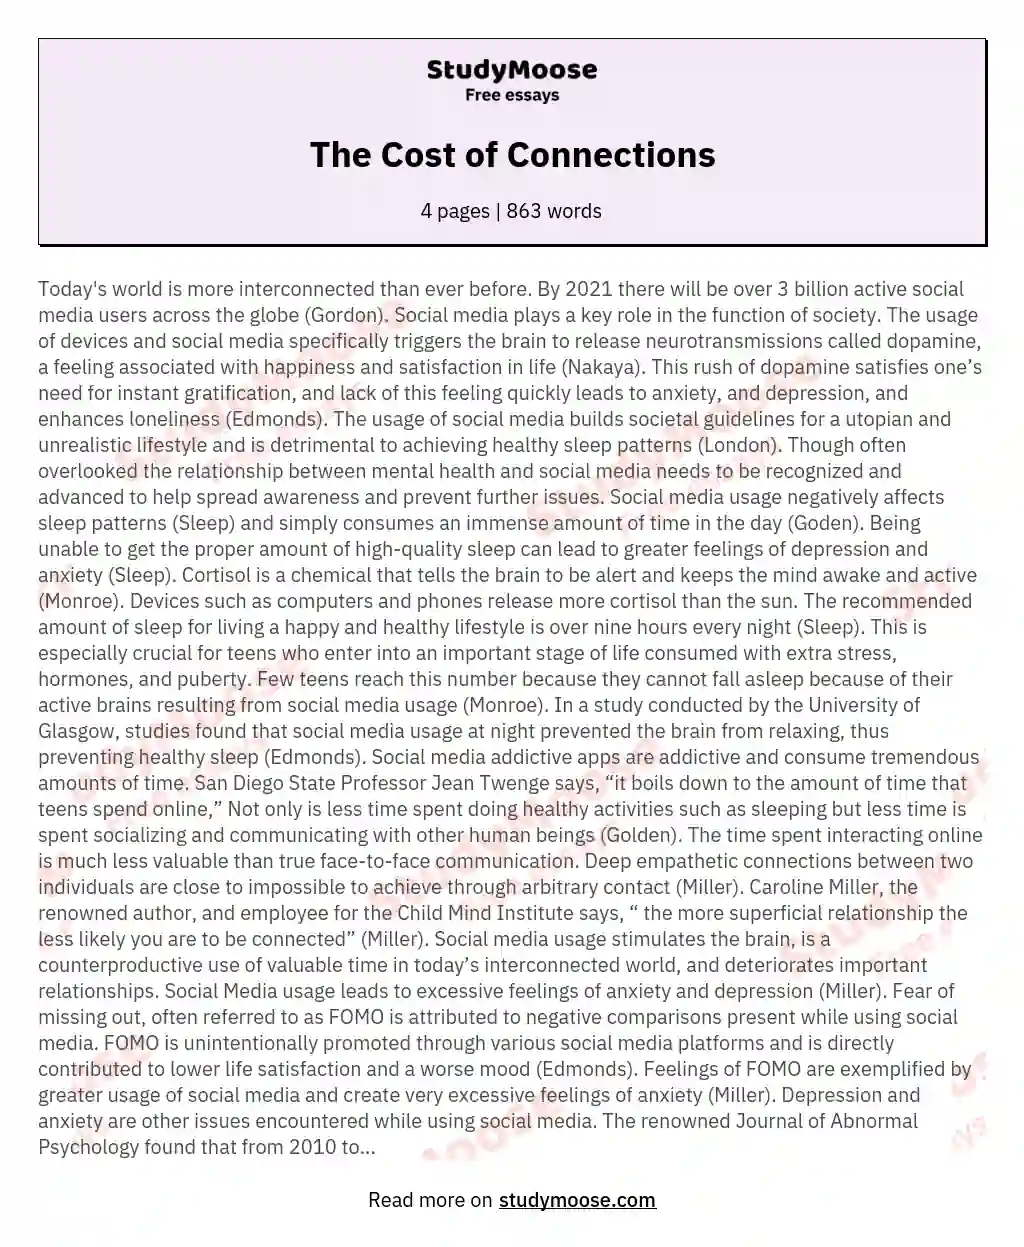 The Cost of Connections essay